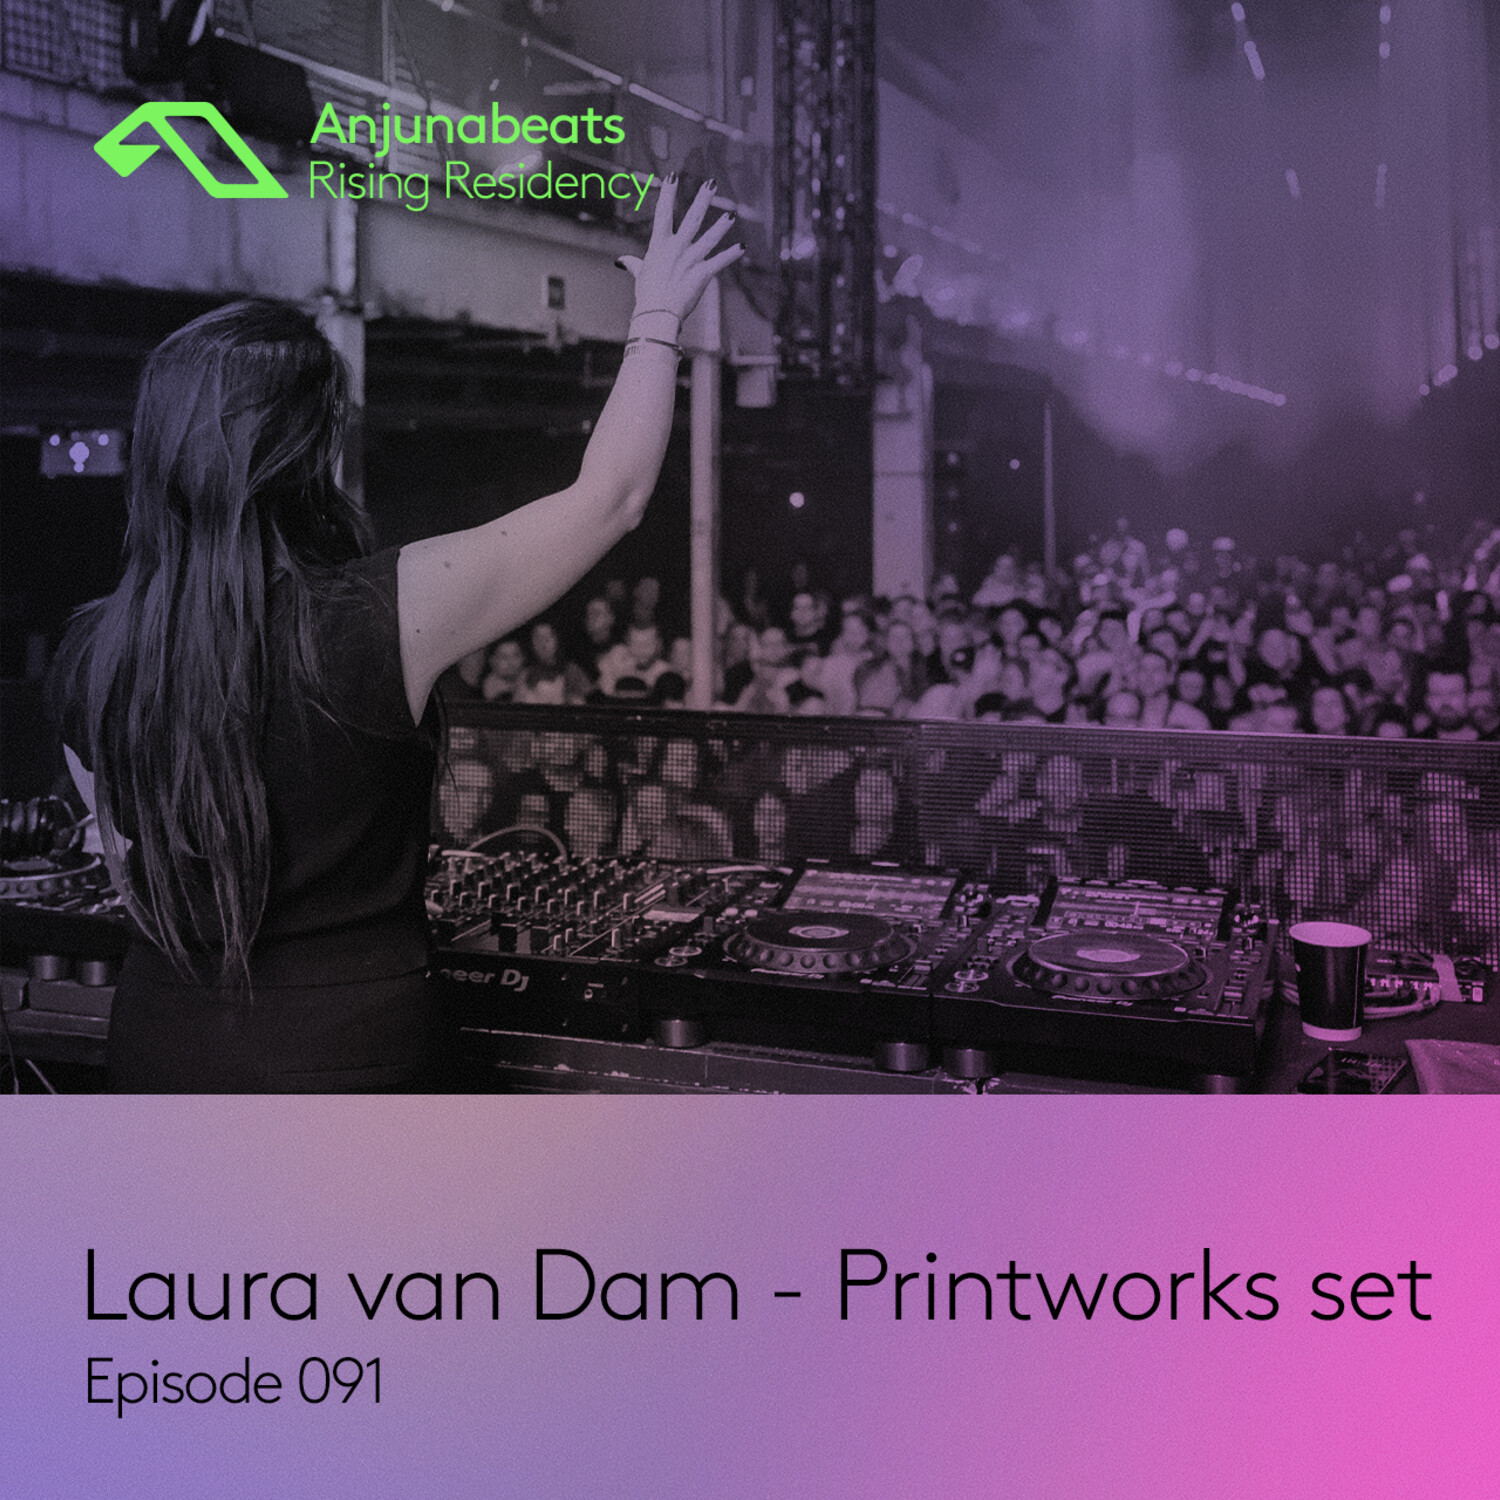 The Anjunabeats Rising Residency 091 with Laura van Dam - Live at Printworks